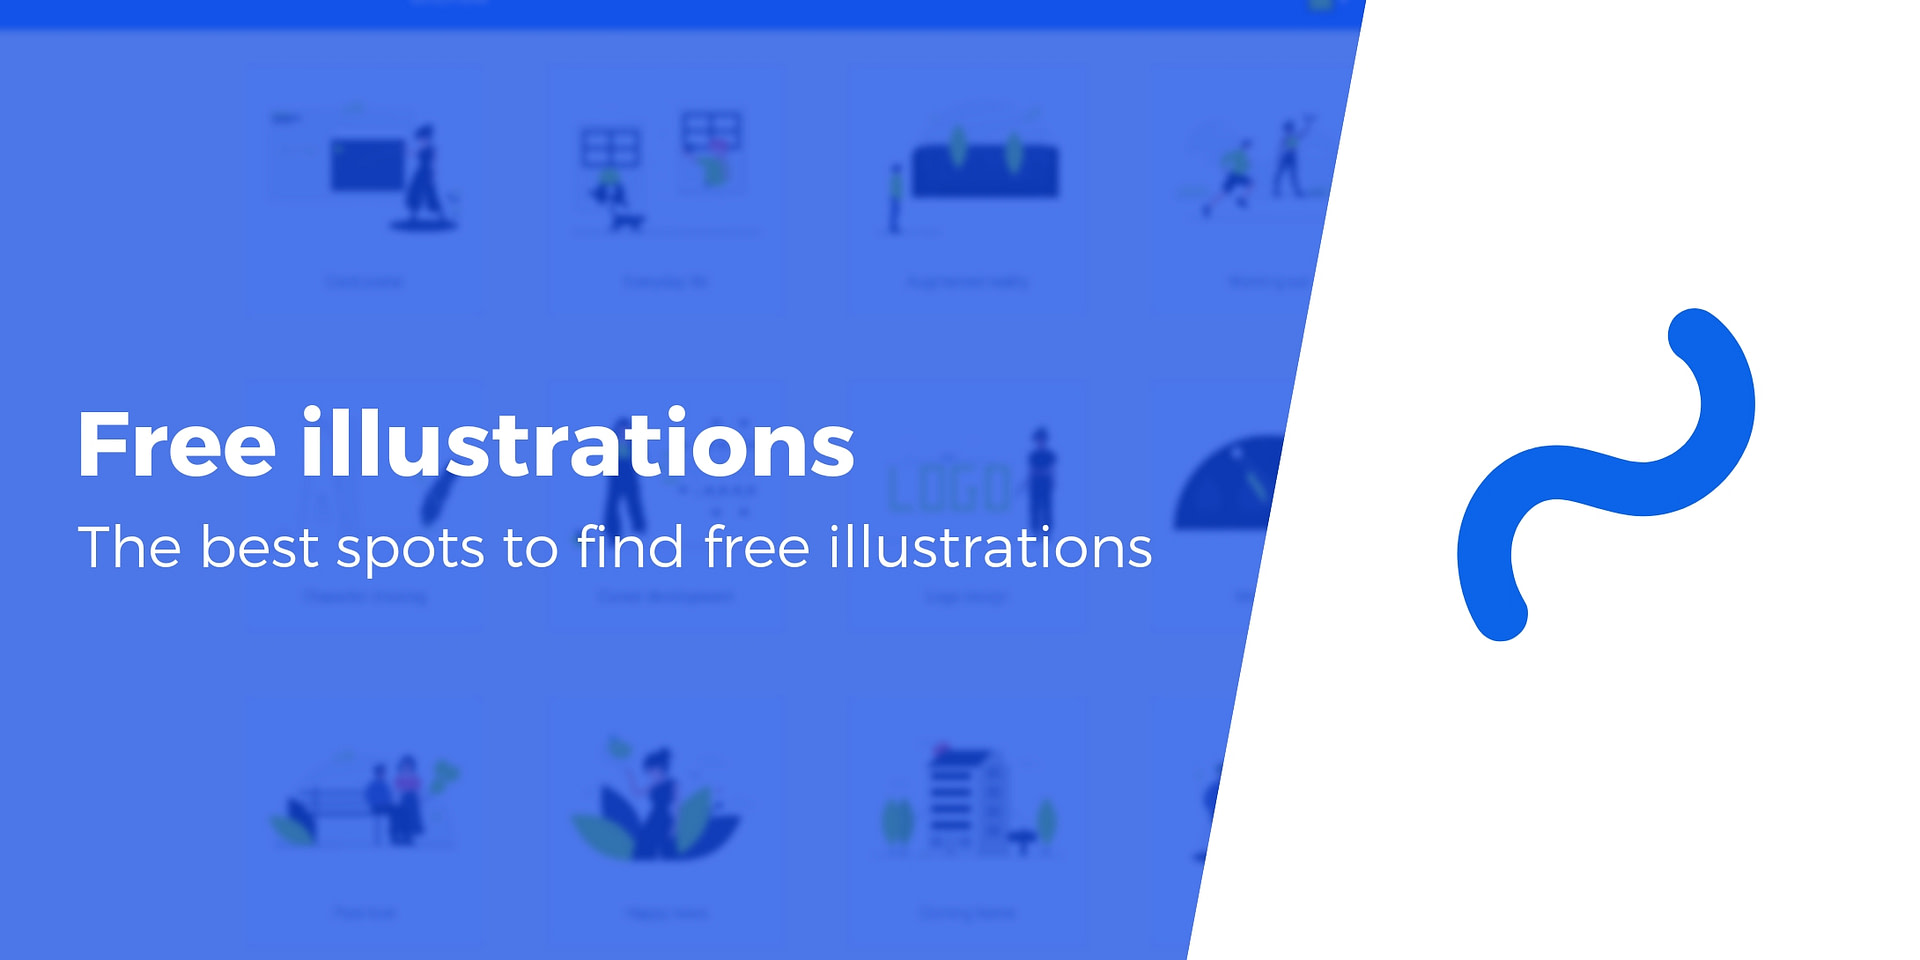 10+ Best Spots to Find Free Illustrations for Your Next Design Project